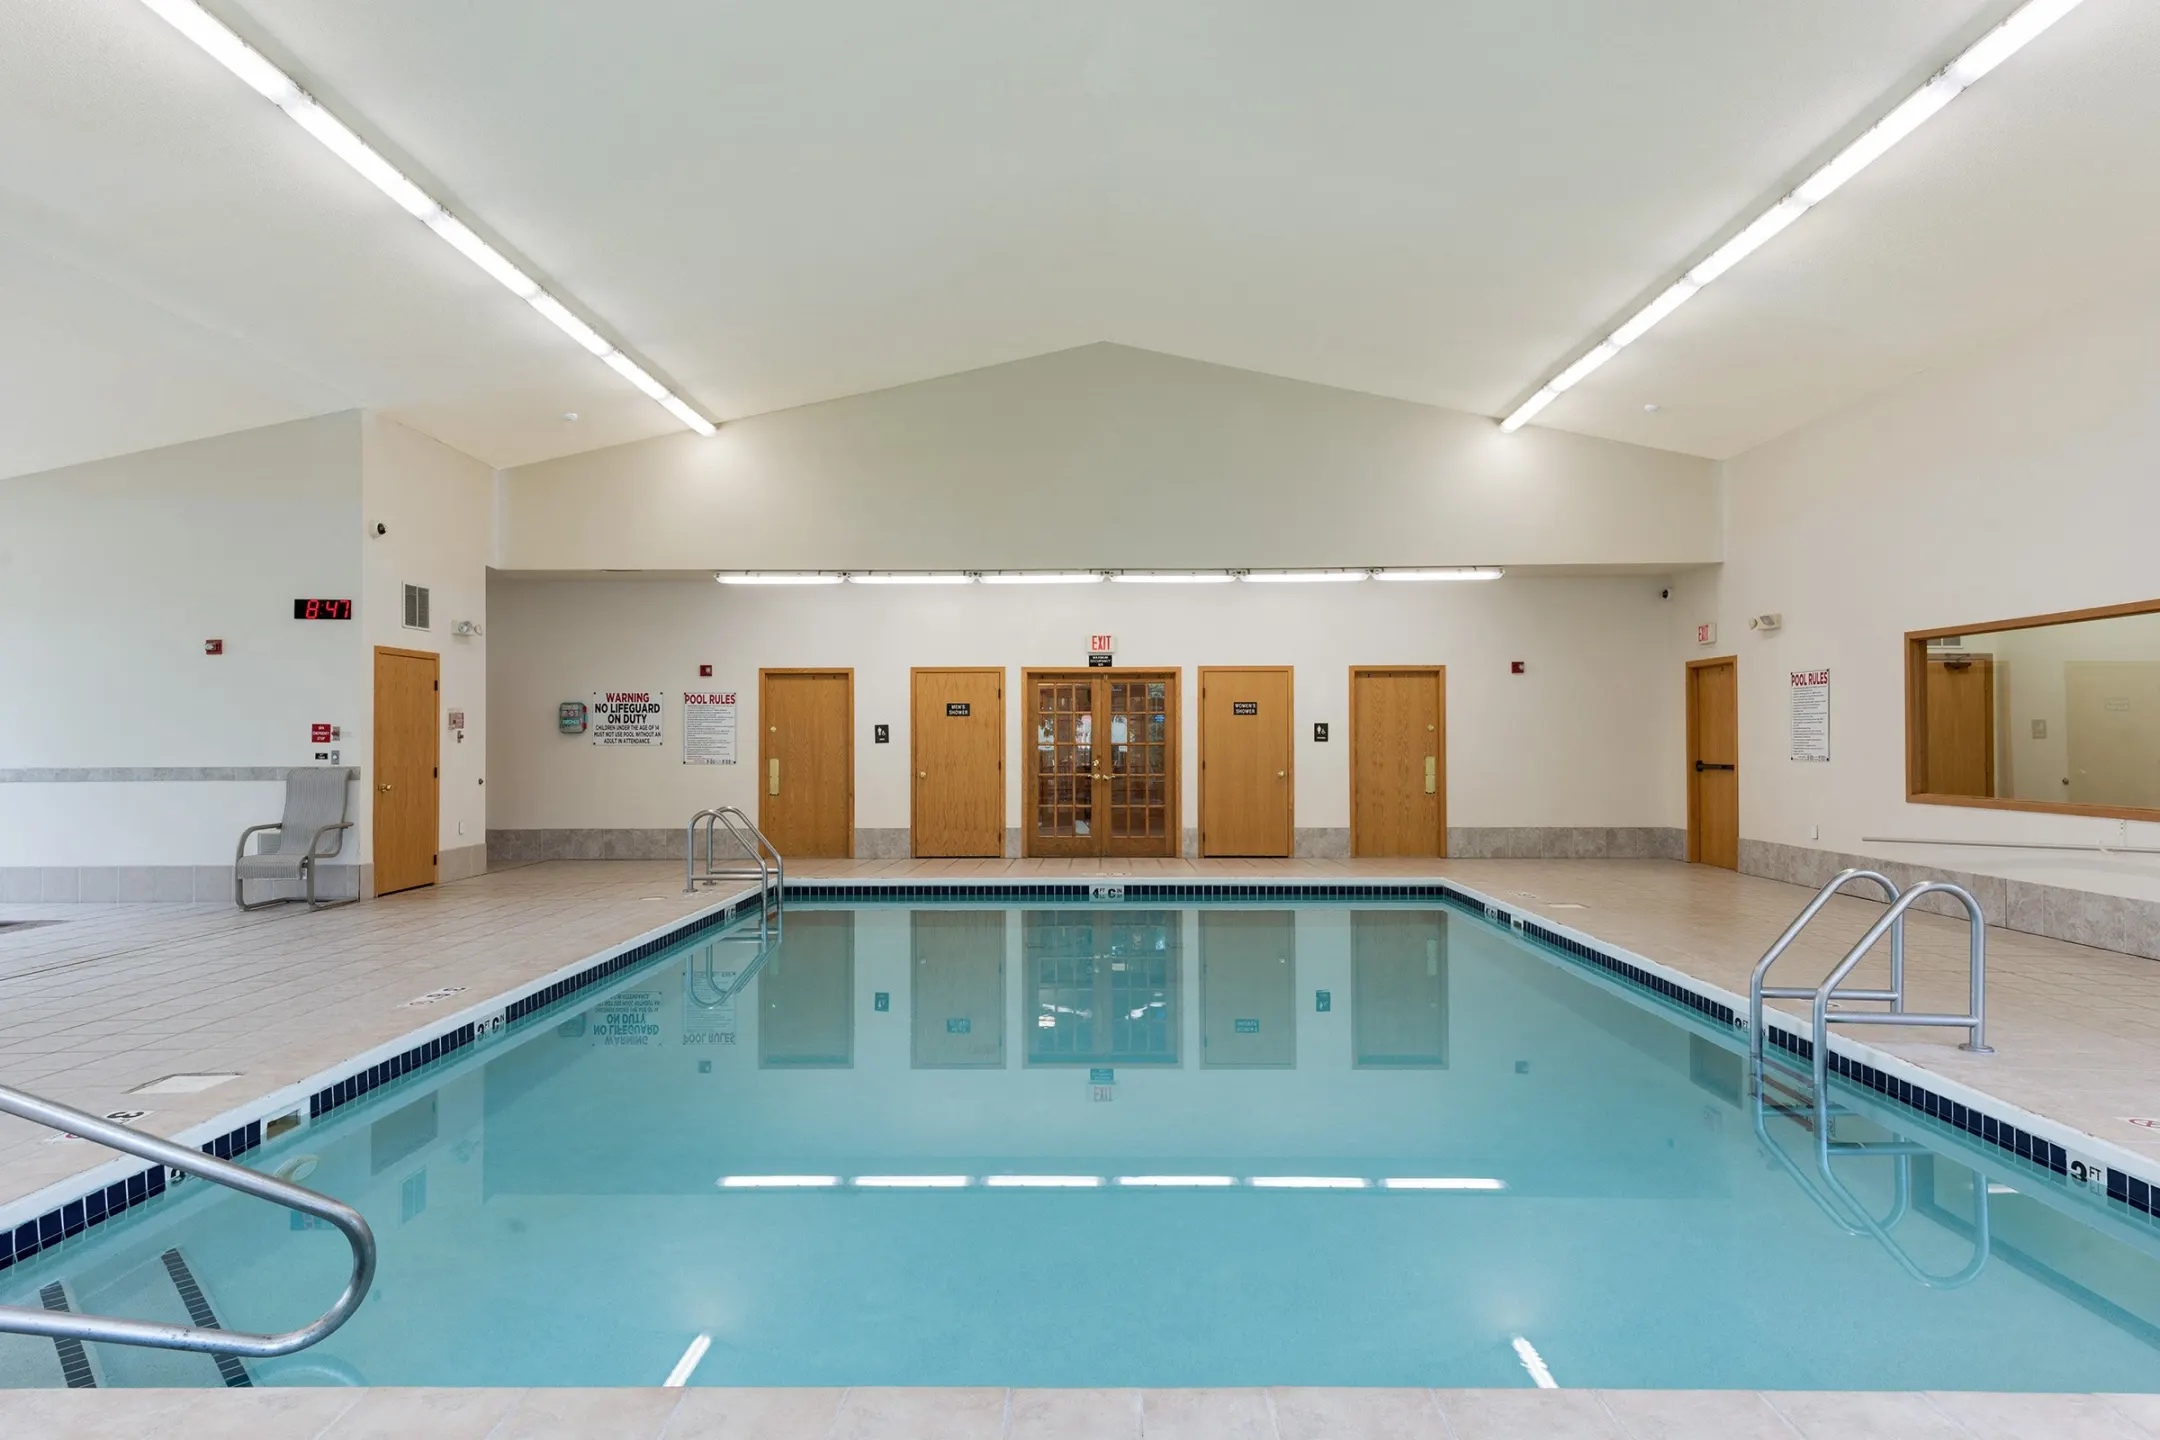 Pool - Platinum Valley Apartments - Sioux Falls, SD